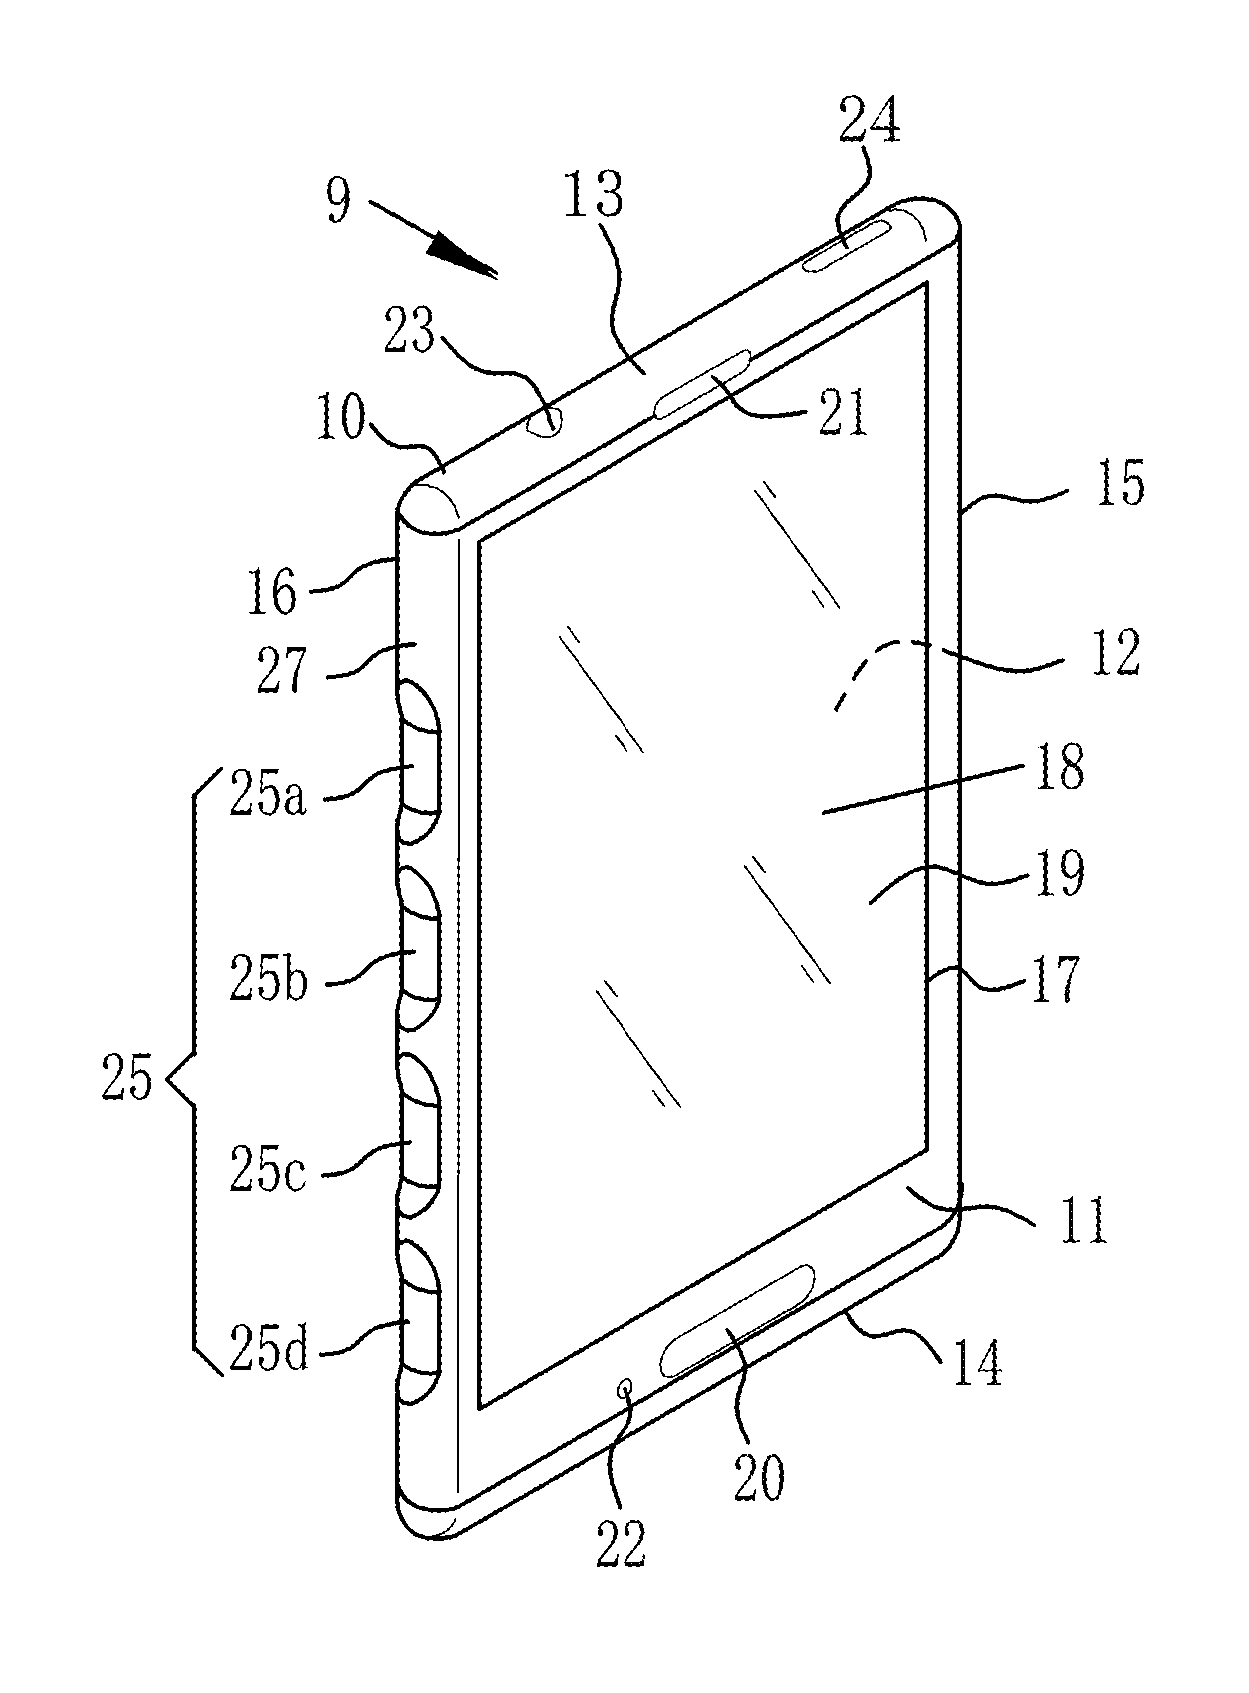 Electronic equipment with display device